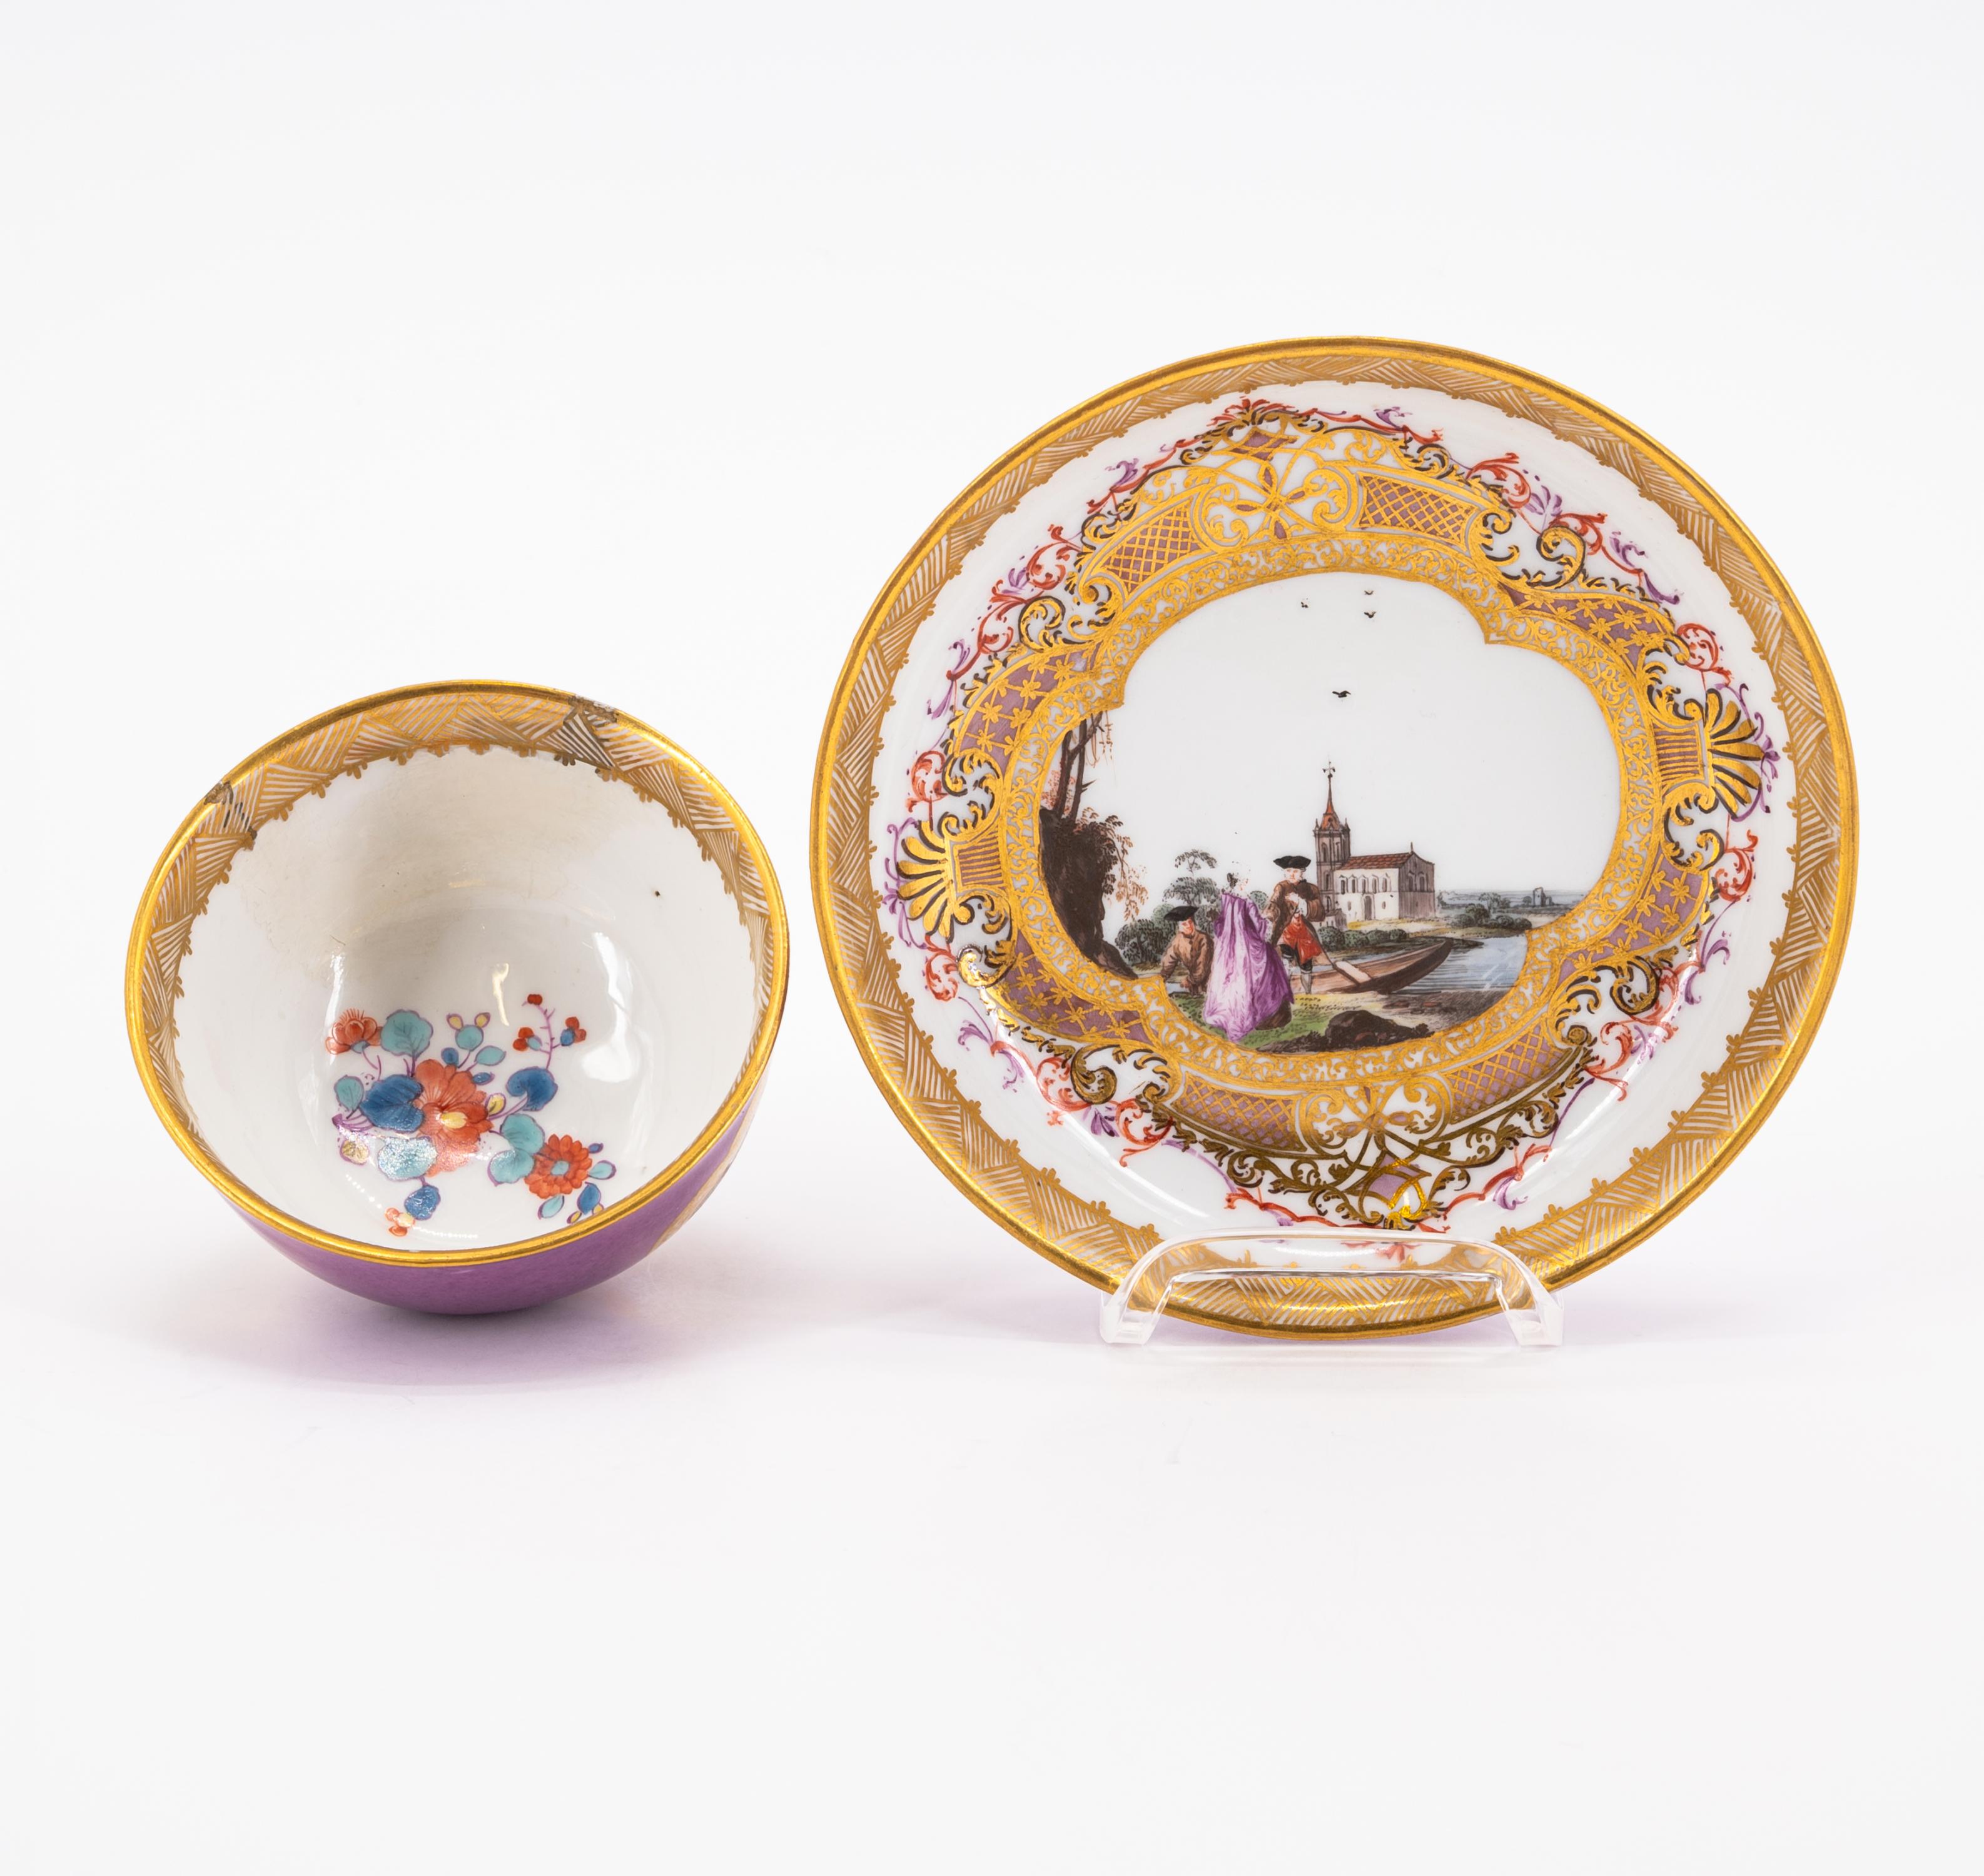 TWO PORCELAIN TEA BOWLS AND TWO SAUCER WITH PURPLE FOND AND MERCHANT NAVY SCENE - Image 10 of 11